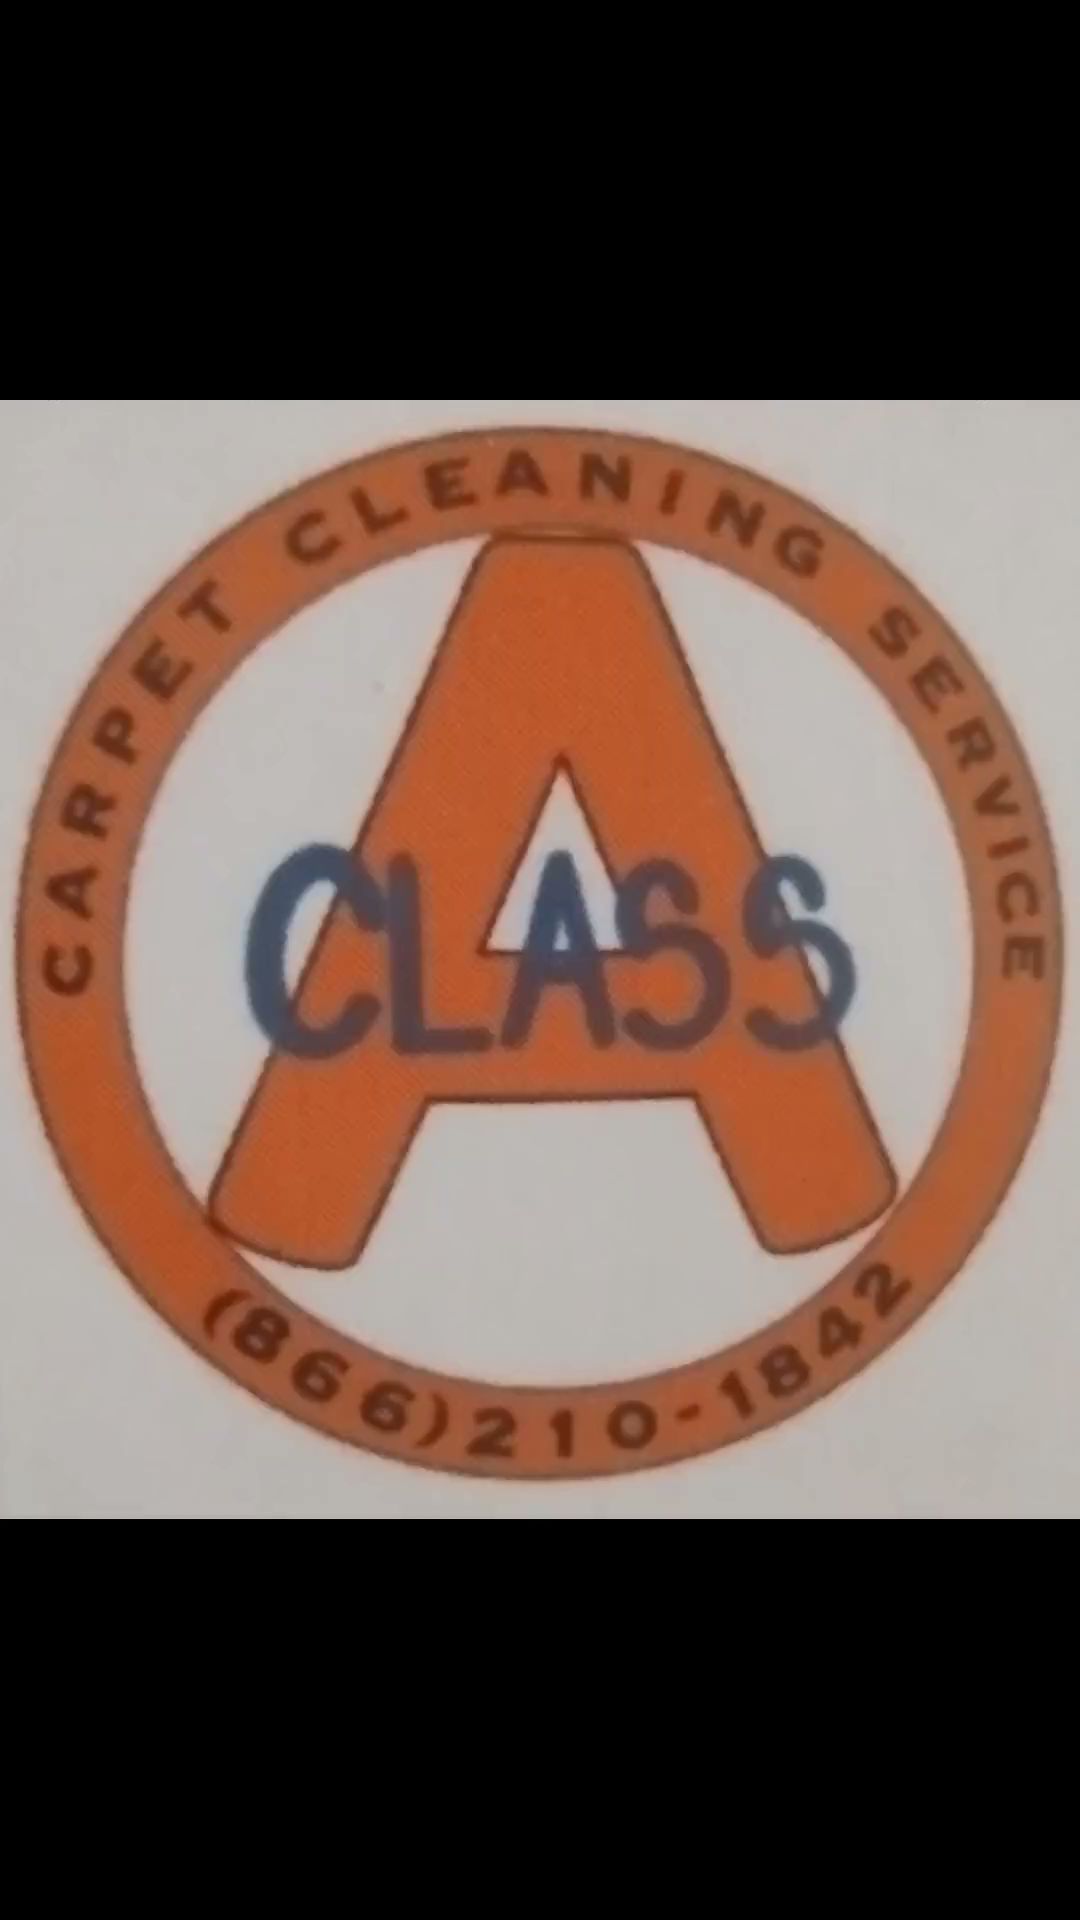 A Class Carpet Upholstery and More LLC..